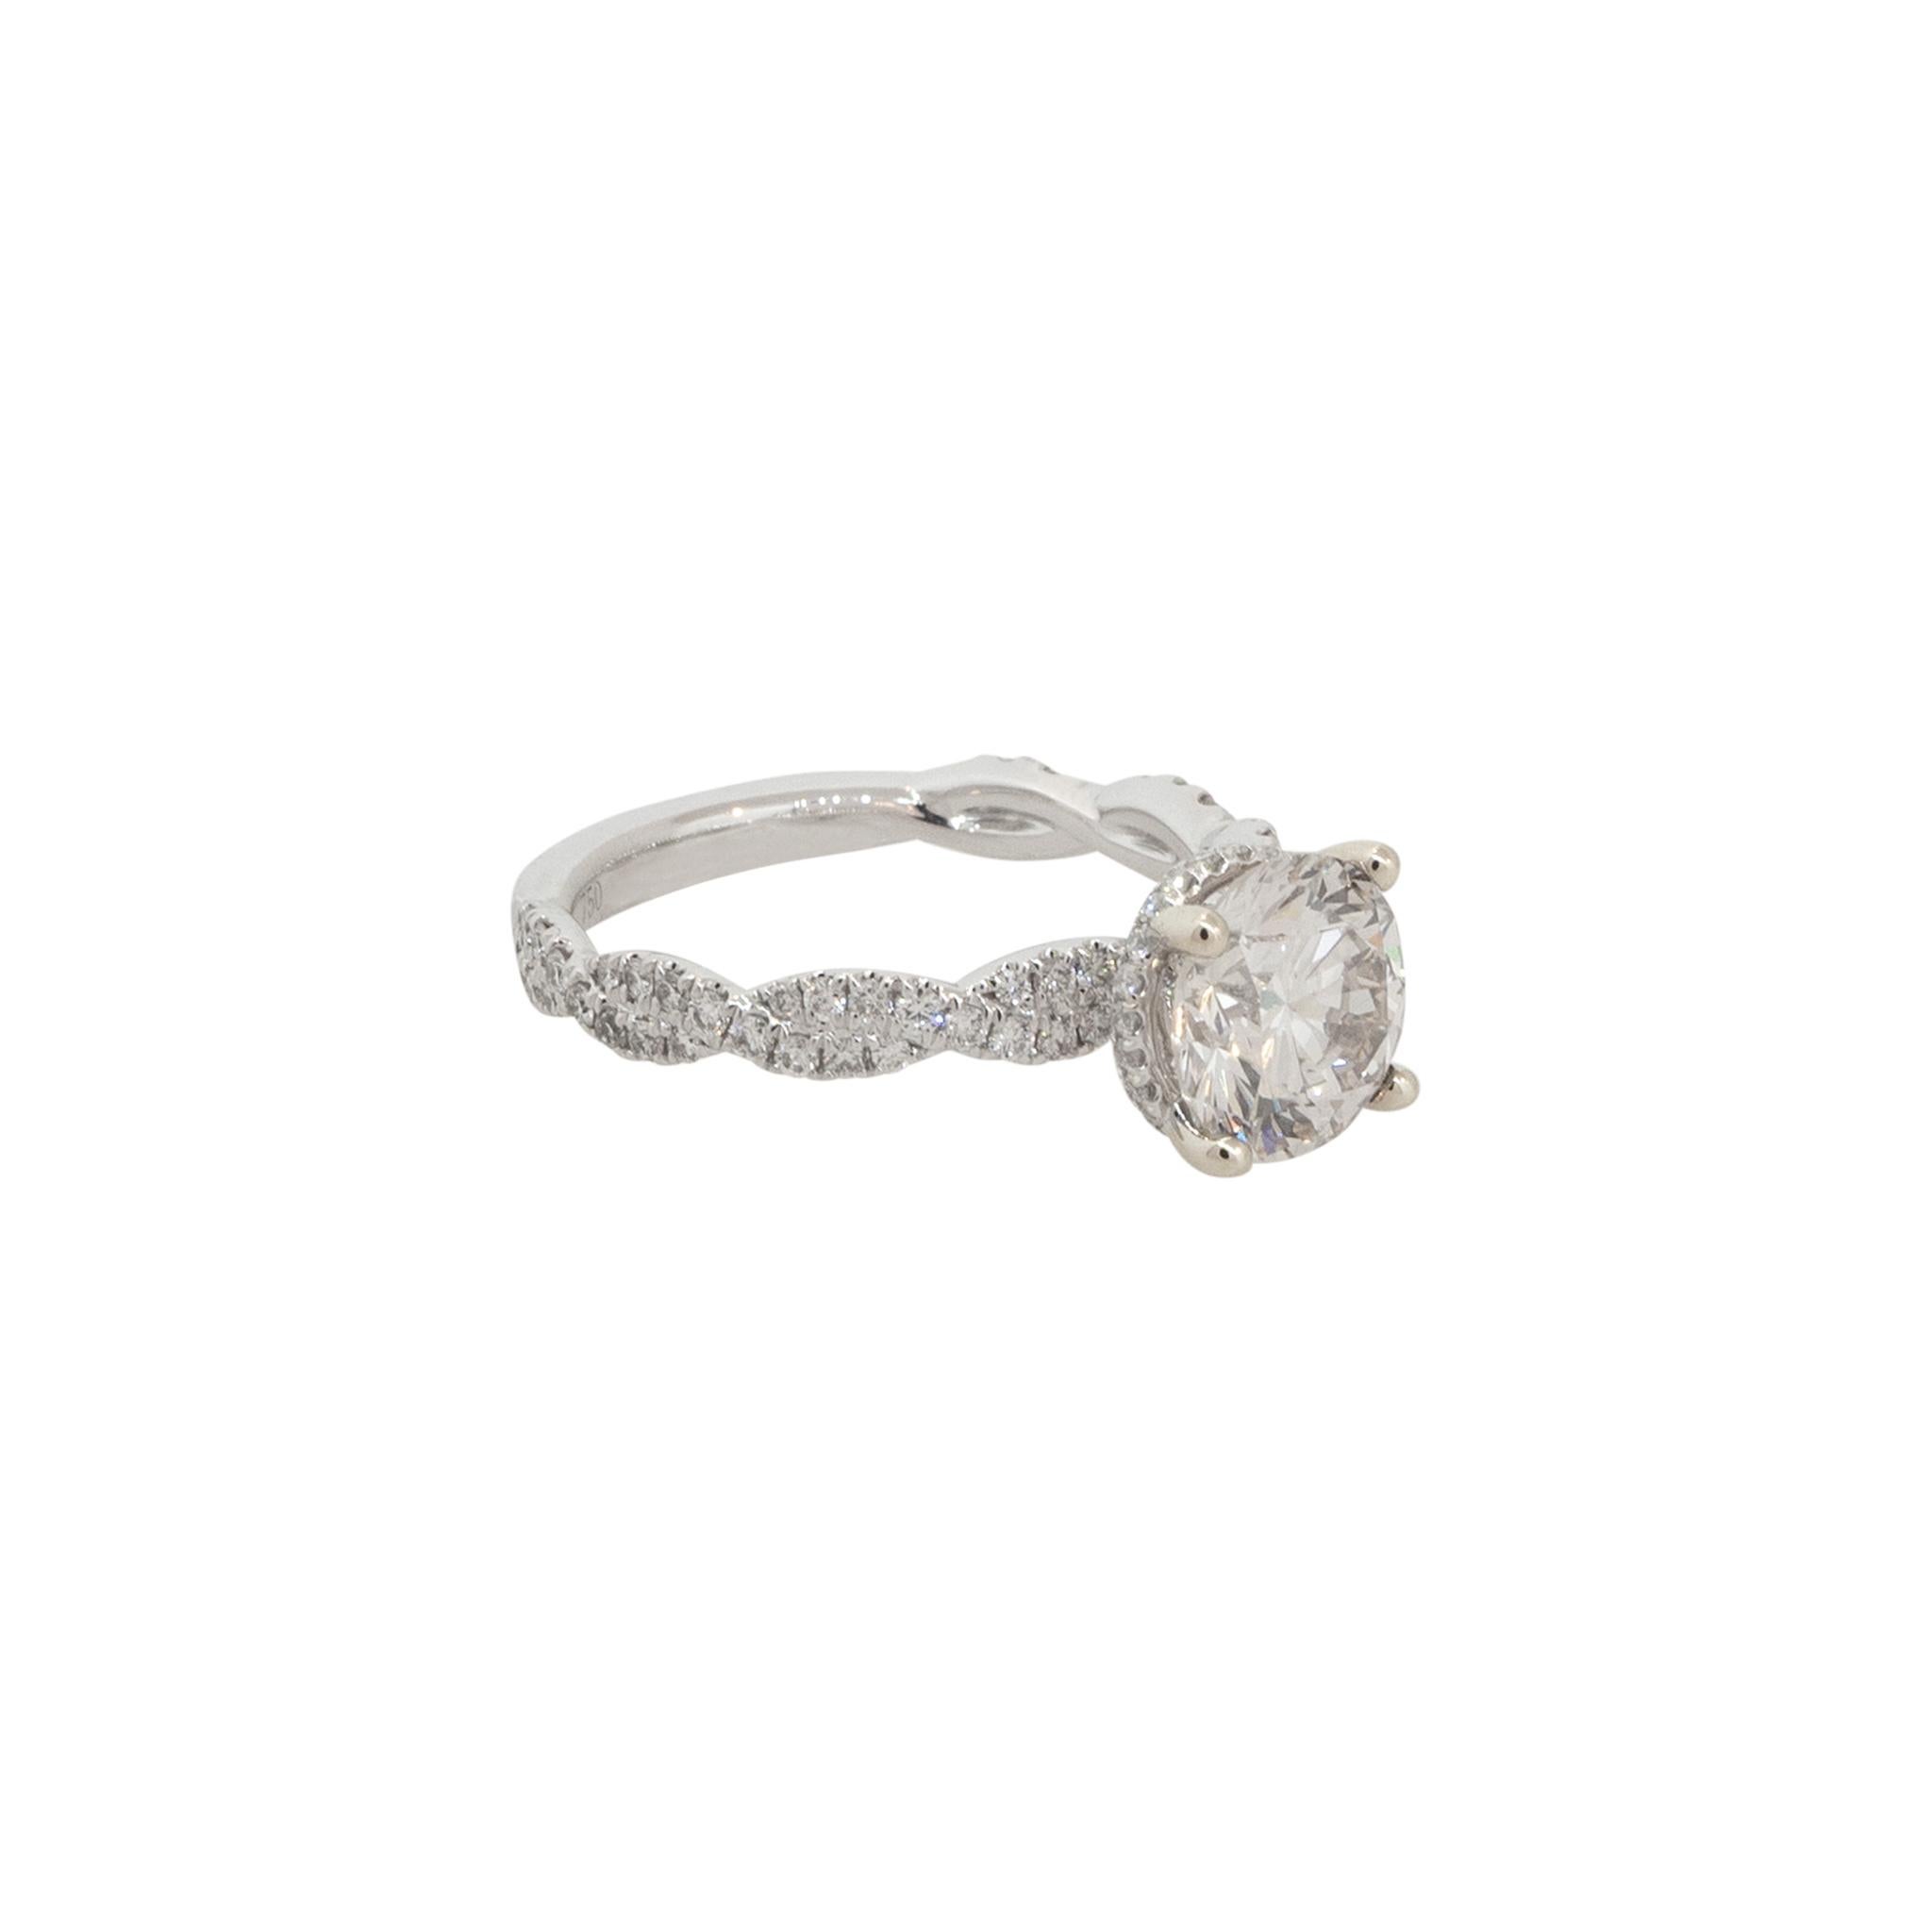 GIA Certified 18k White Gold 2.65ctw Diamond Twisted Engagement Ring

Raymond Lee Jewelers in Boca Raton -- South Florida’s destination for diamonds, fine jewelry, antique jewelry, estate pieces, and vintage jewels.

Style: Women's 4 Prong Halo